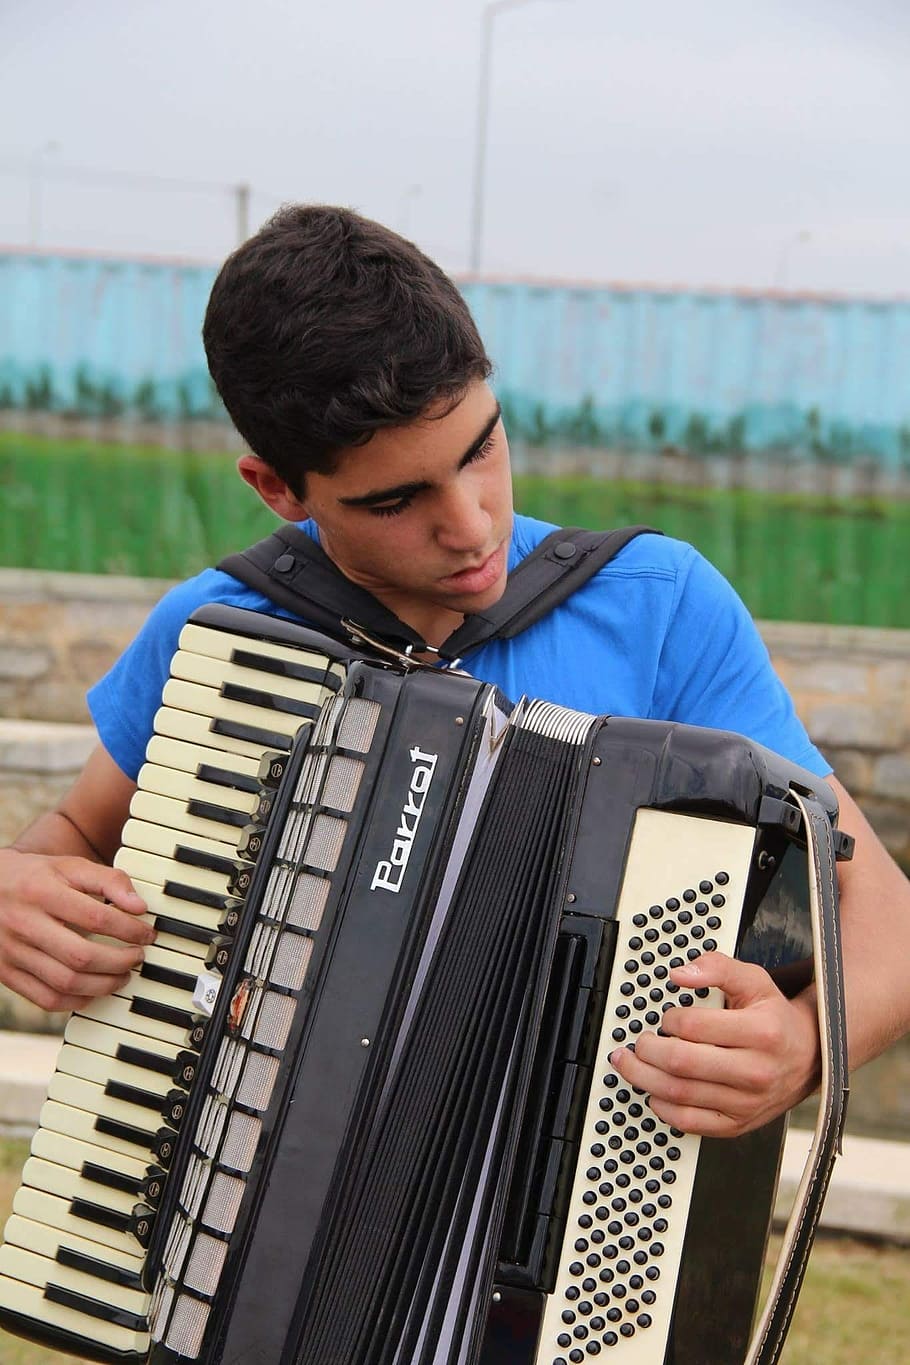 acordeon, accordion, child, boy, instrument, music, musician, real people, musical instrument, one person